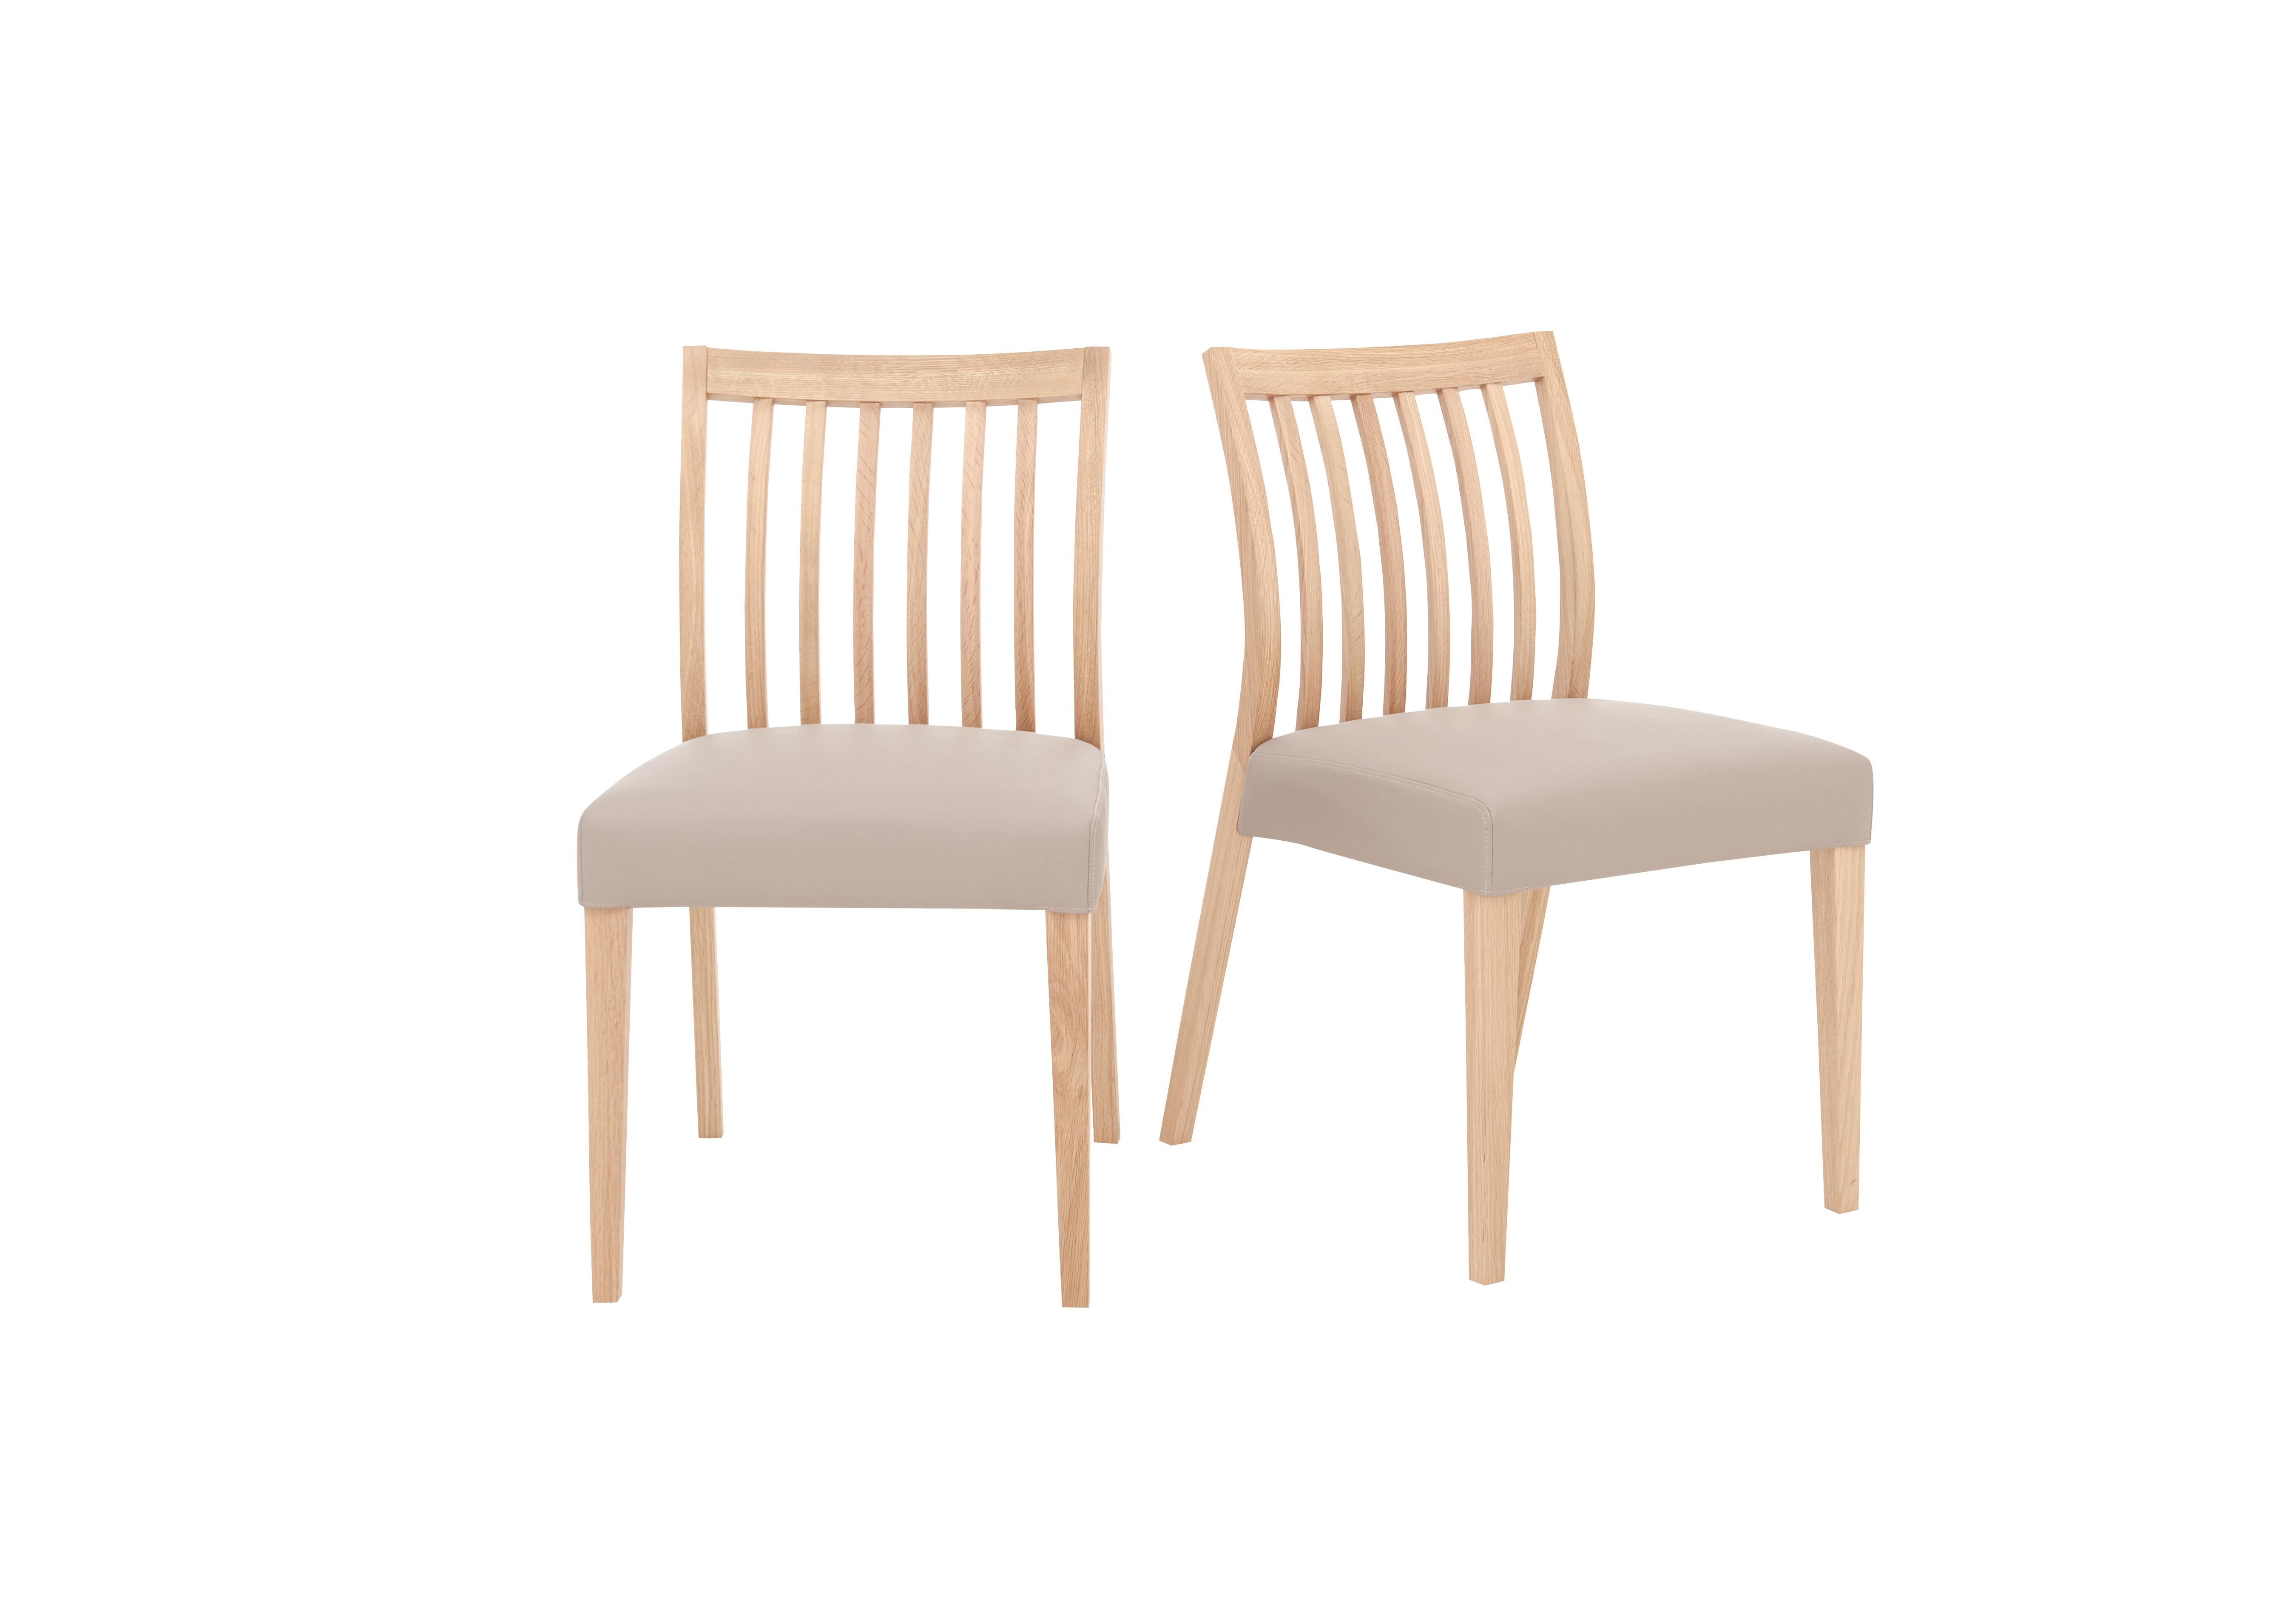 Duplex Pair of Low Slatted-Back Dining Chairs in Grey Bonded Faux Leather on Furniture Village